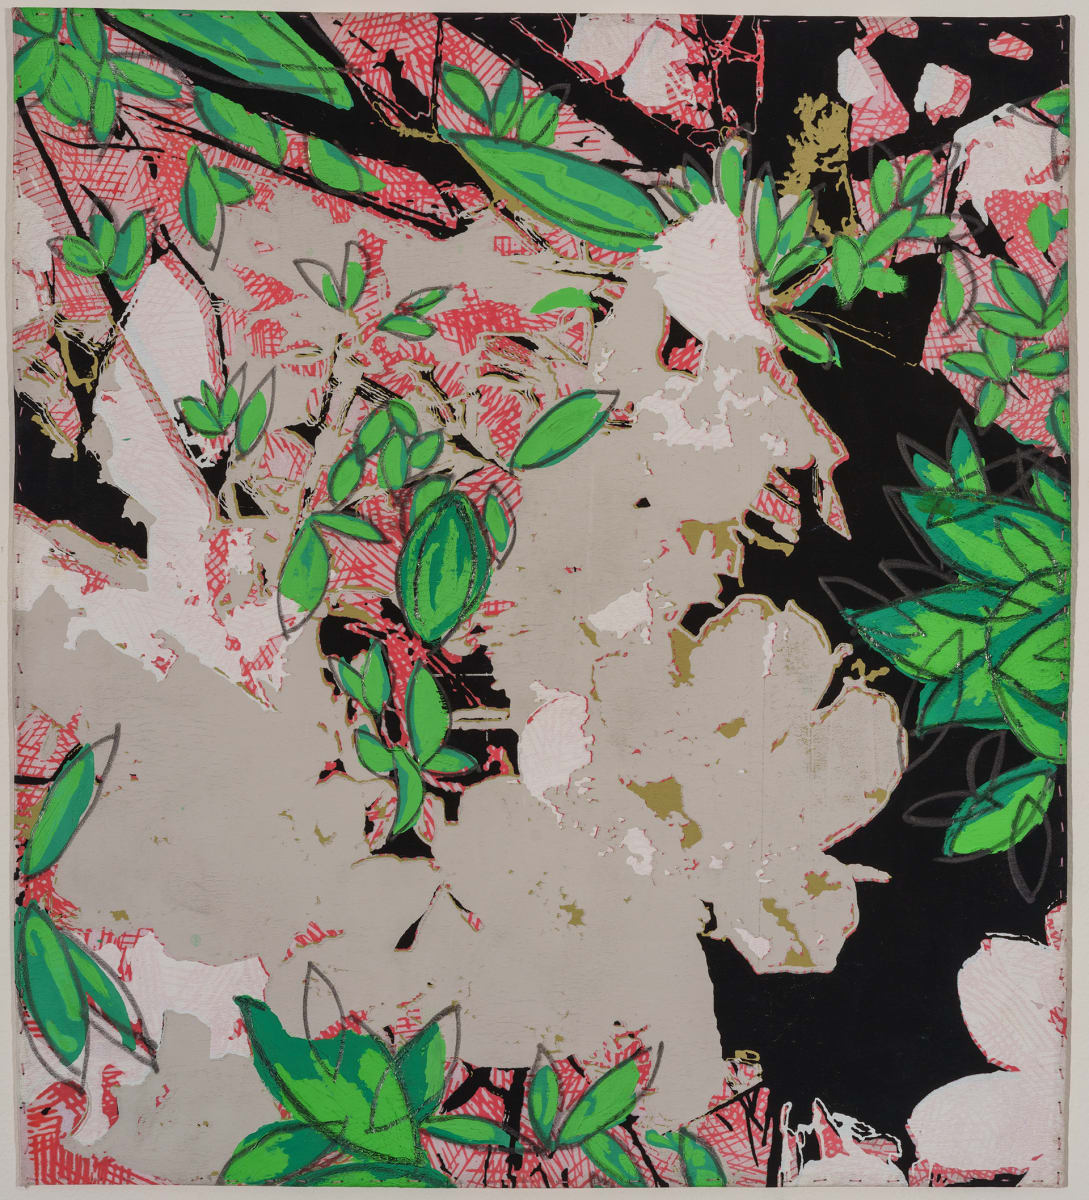 Azalea 6 by Emma Treadwell  Image: Multi-layered Silk Screen Print on Silk Charmeuse. Before printing, the silk is painted with thickened and thinned dyes. Each printed color represents one layer. Each layer requires one screen. This print uses 7 screens. The edges are hand stitched.